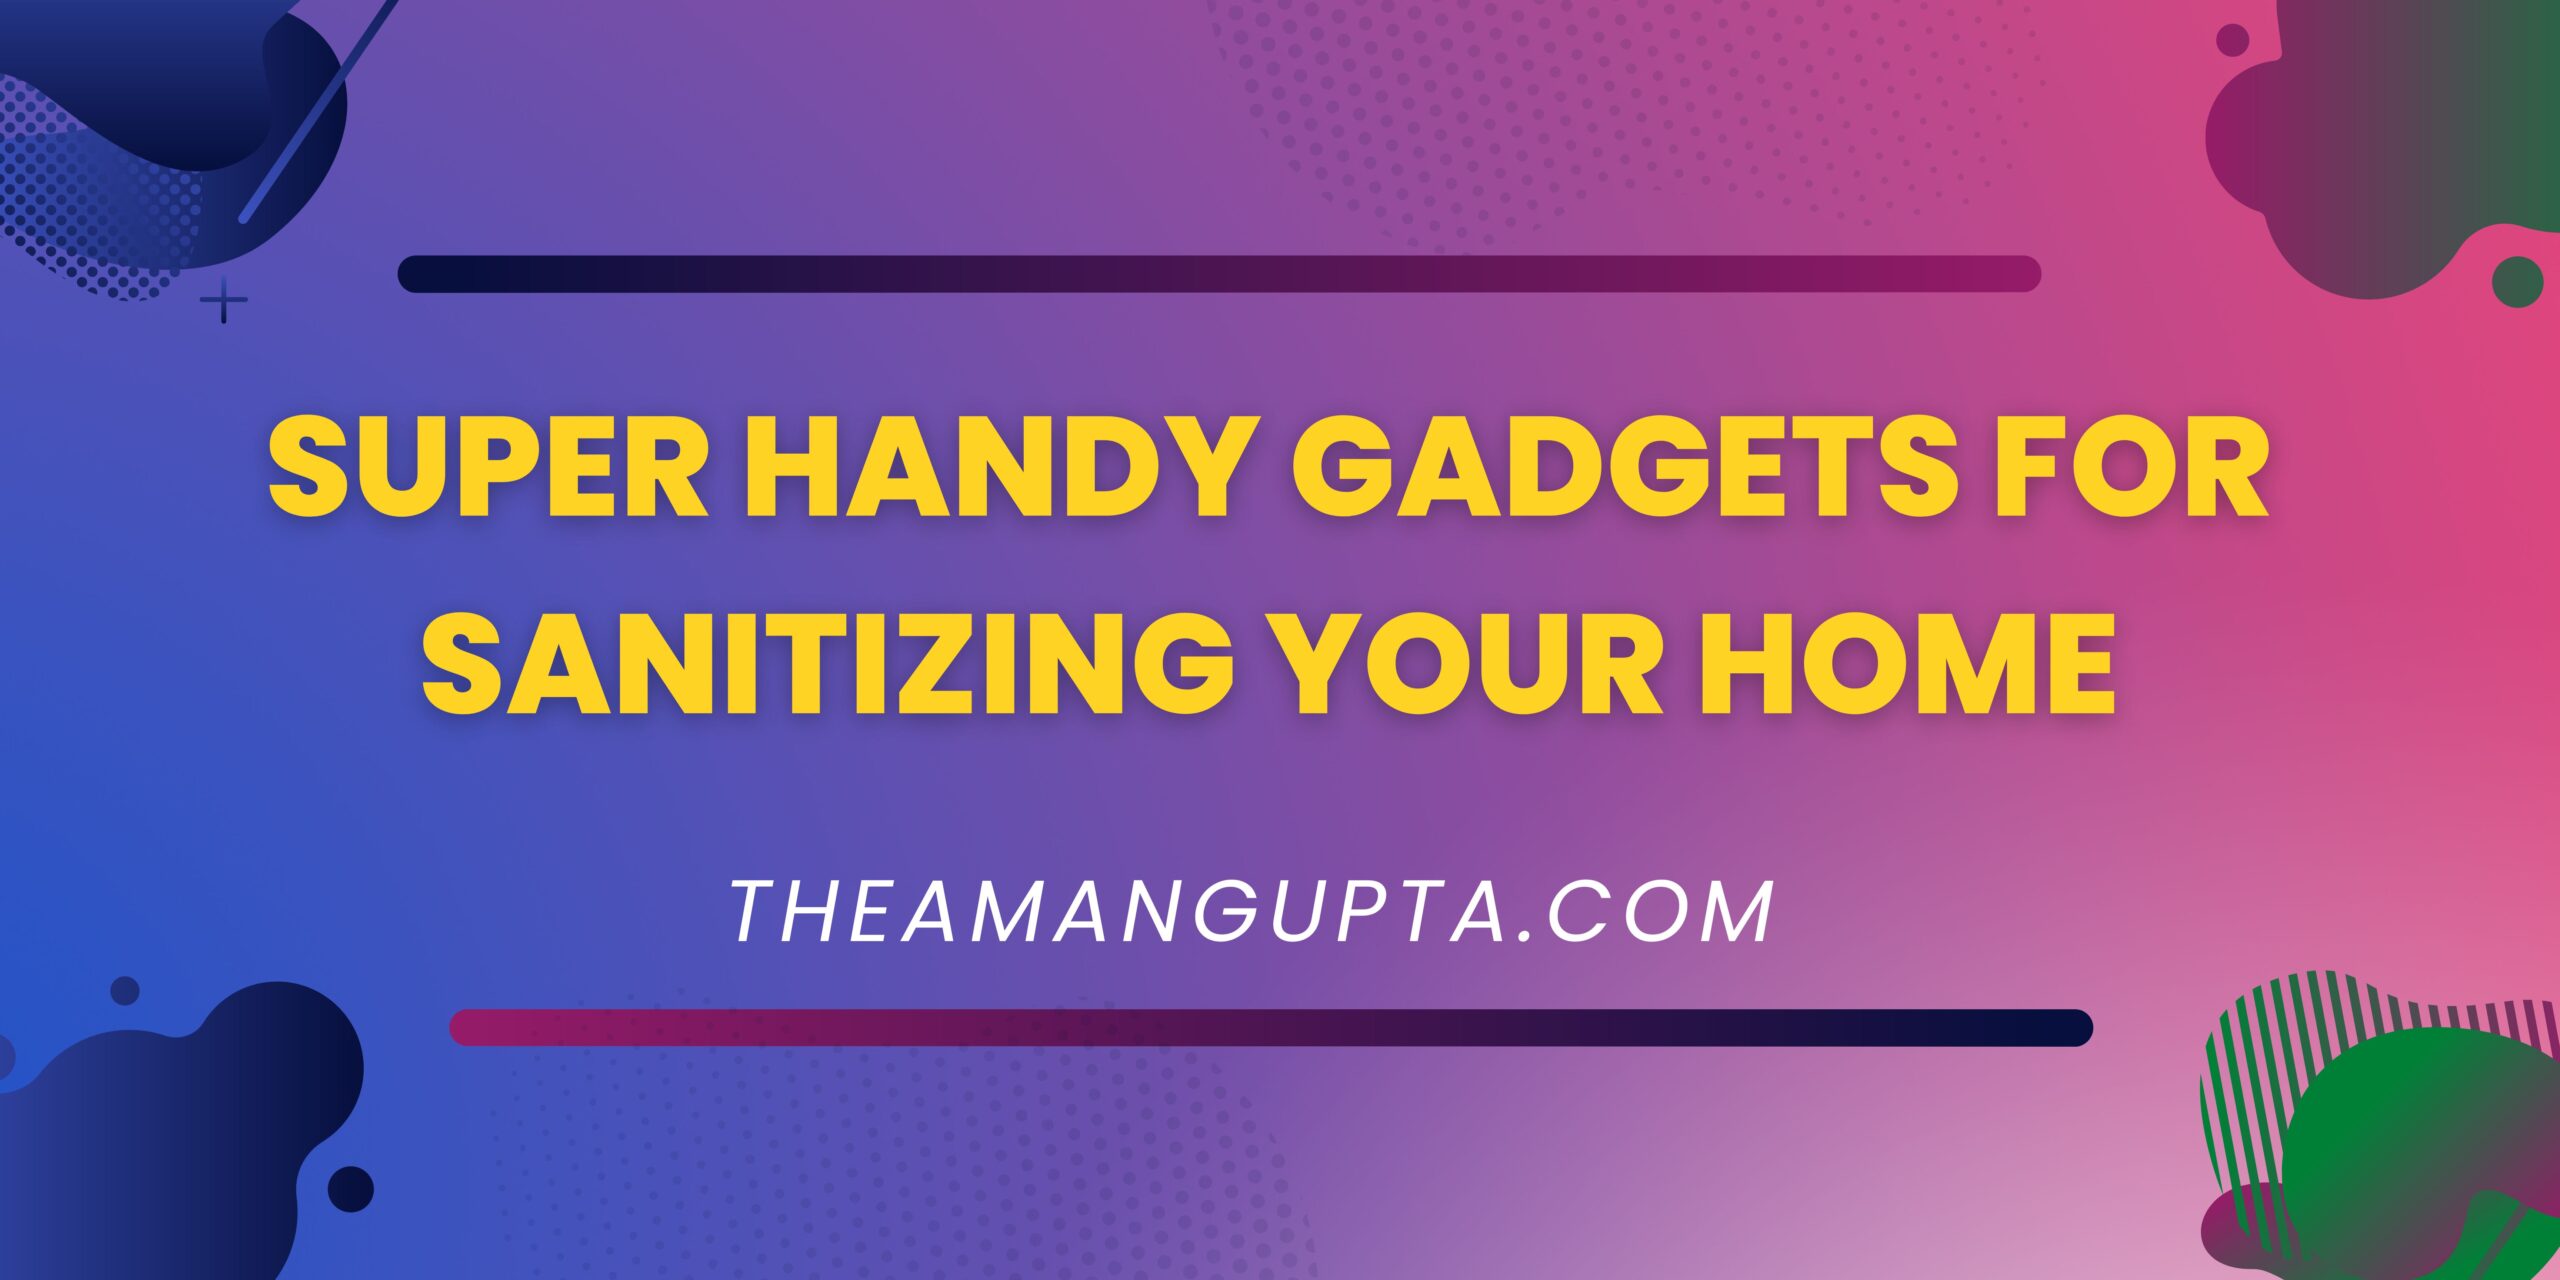 Super Handy Gadgets For Sanitizing Your Home|Sanitizing Your Home|Tannu Rani|Theamangupta